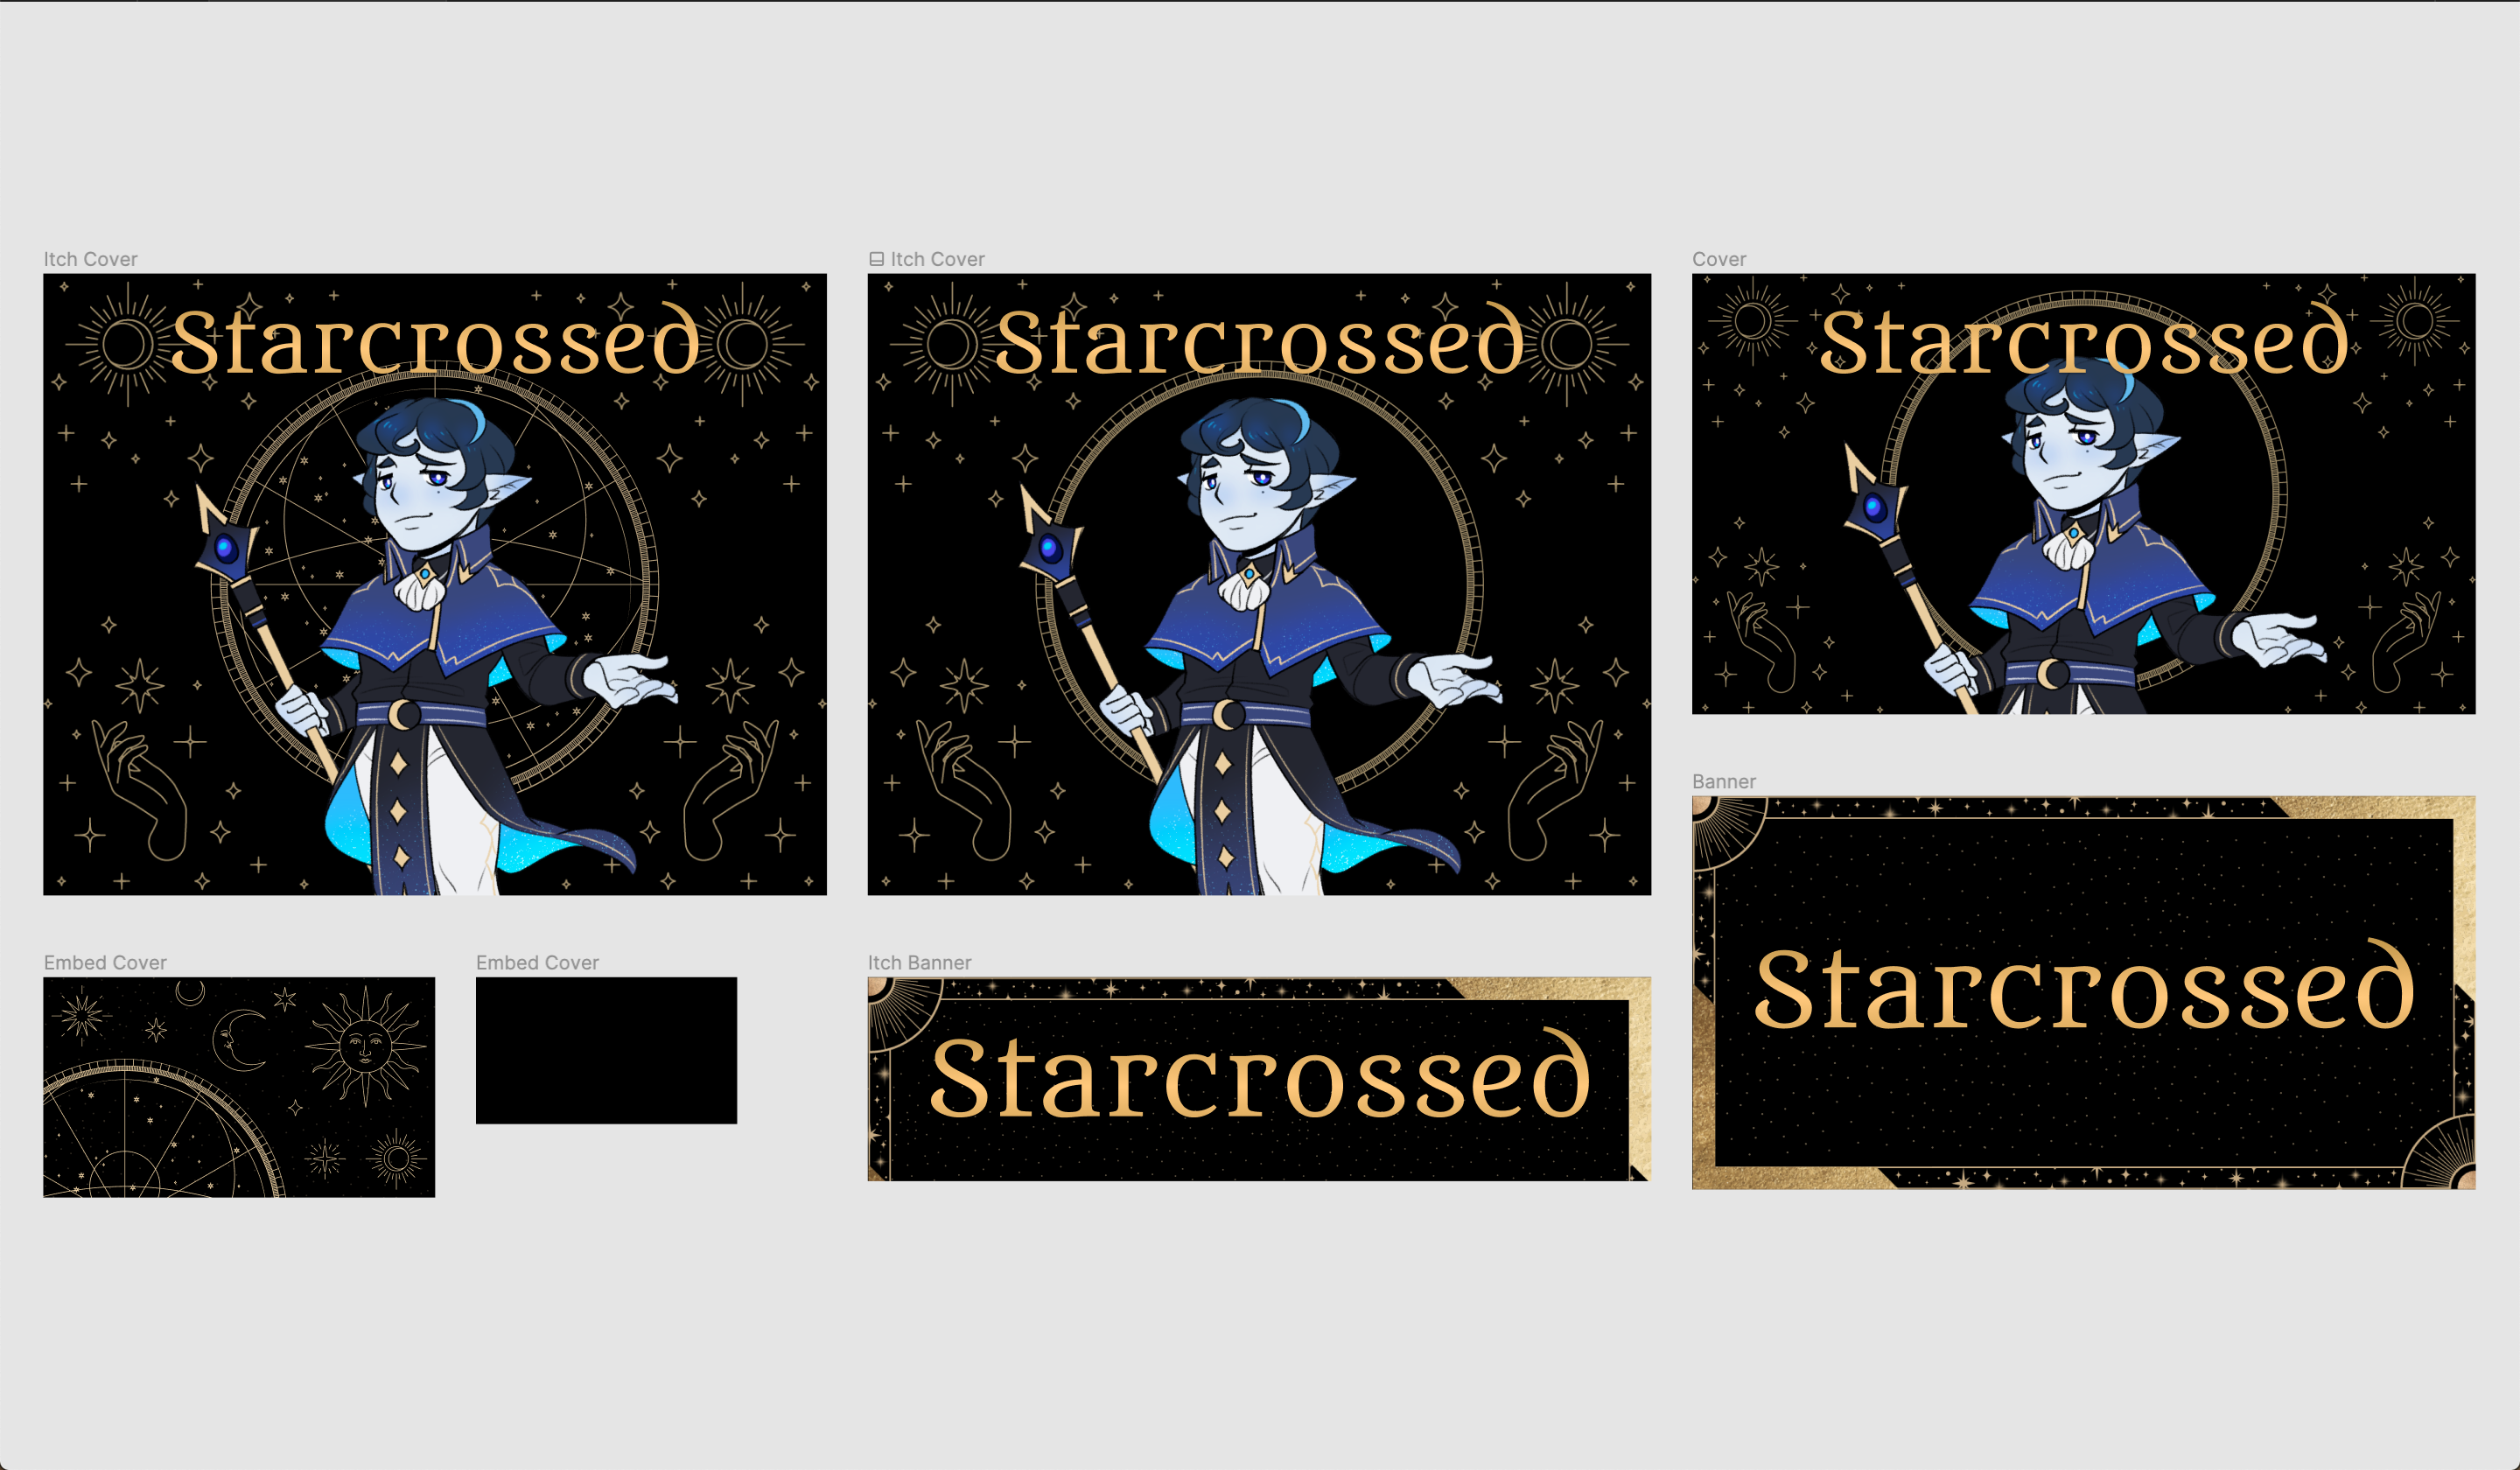 Starcrossed Covers